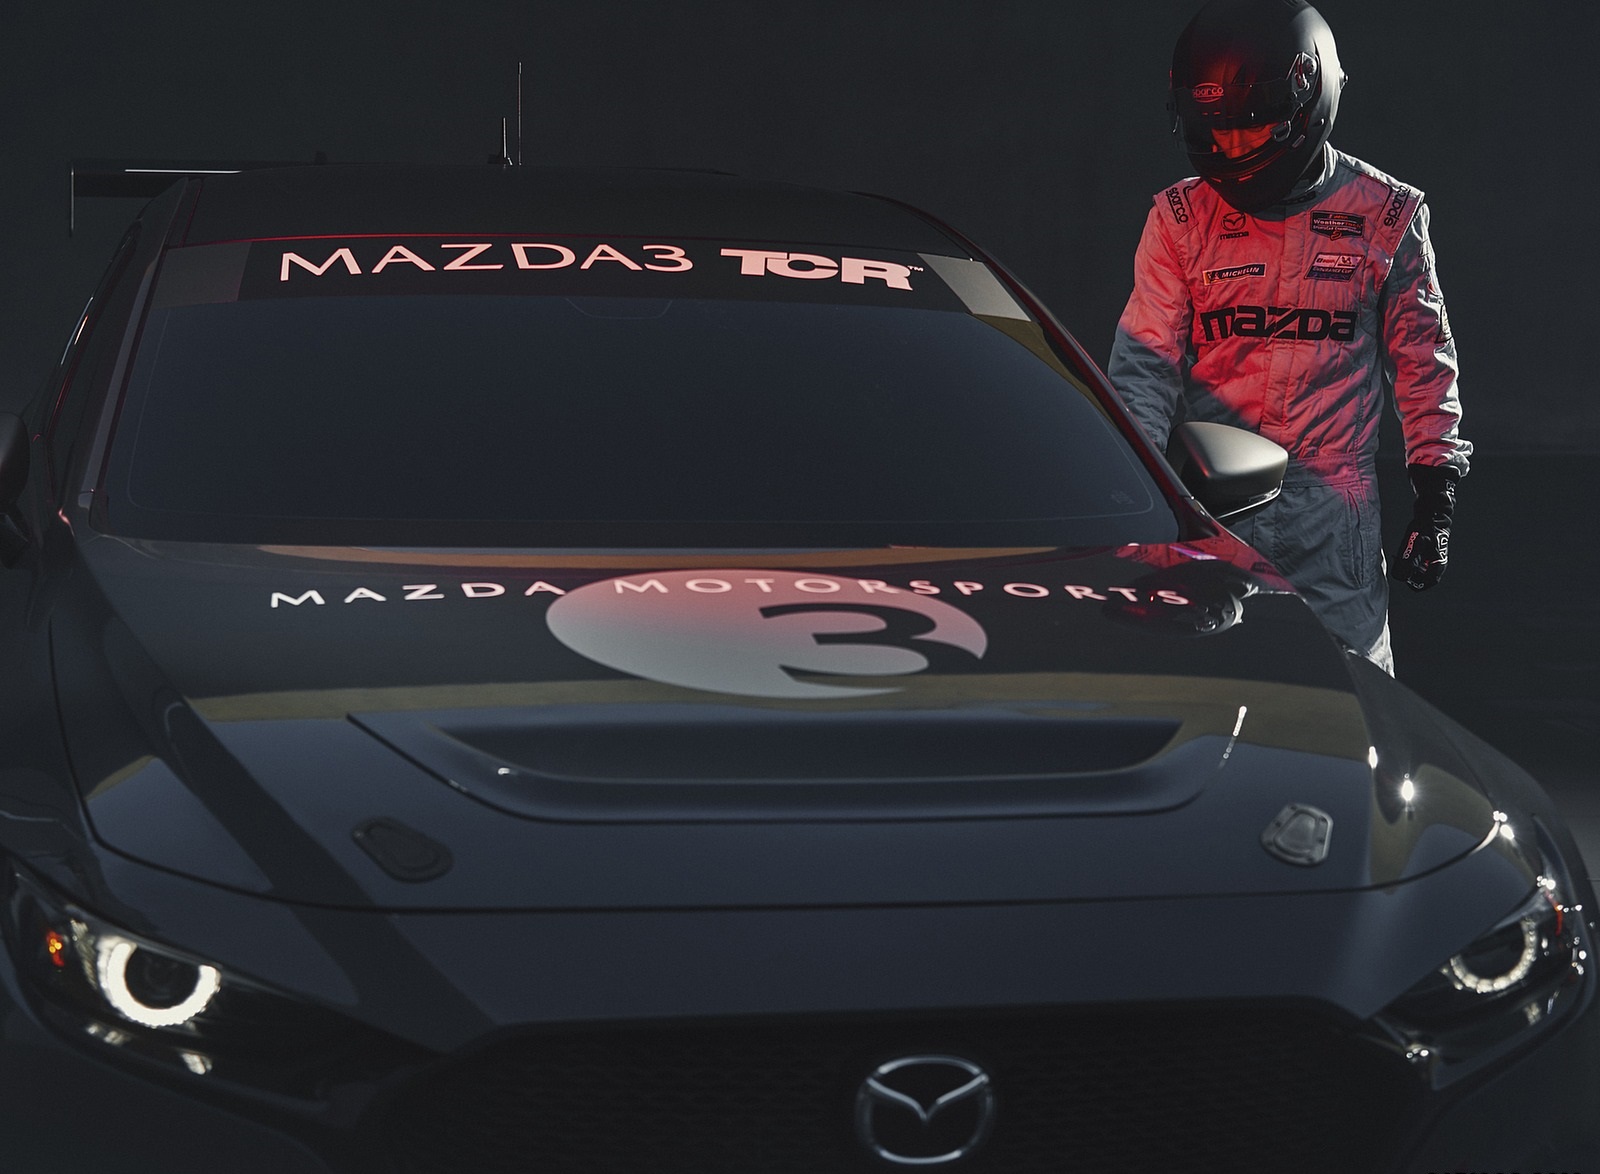 2020 Mazda3 TCR Detail Wallpapers #11 of 13